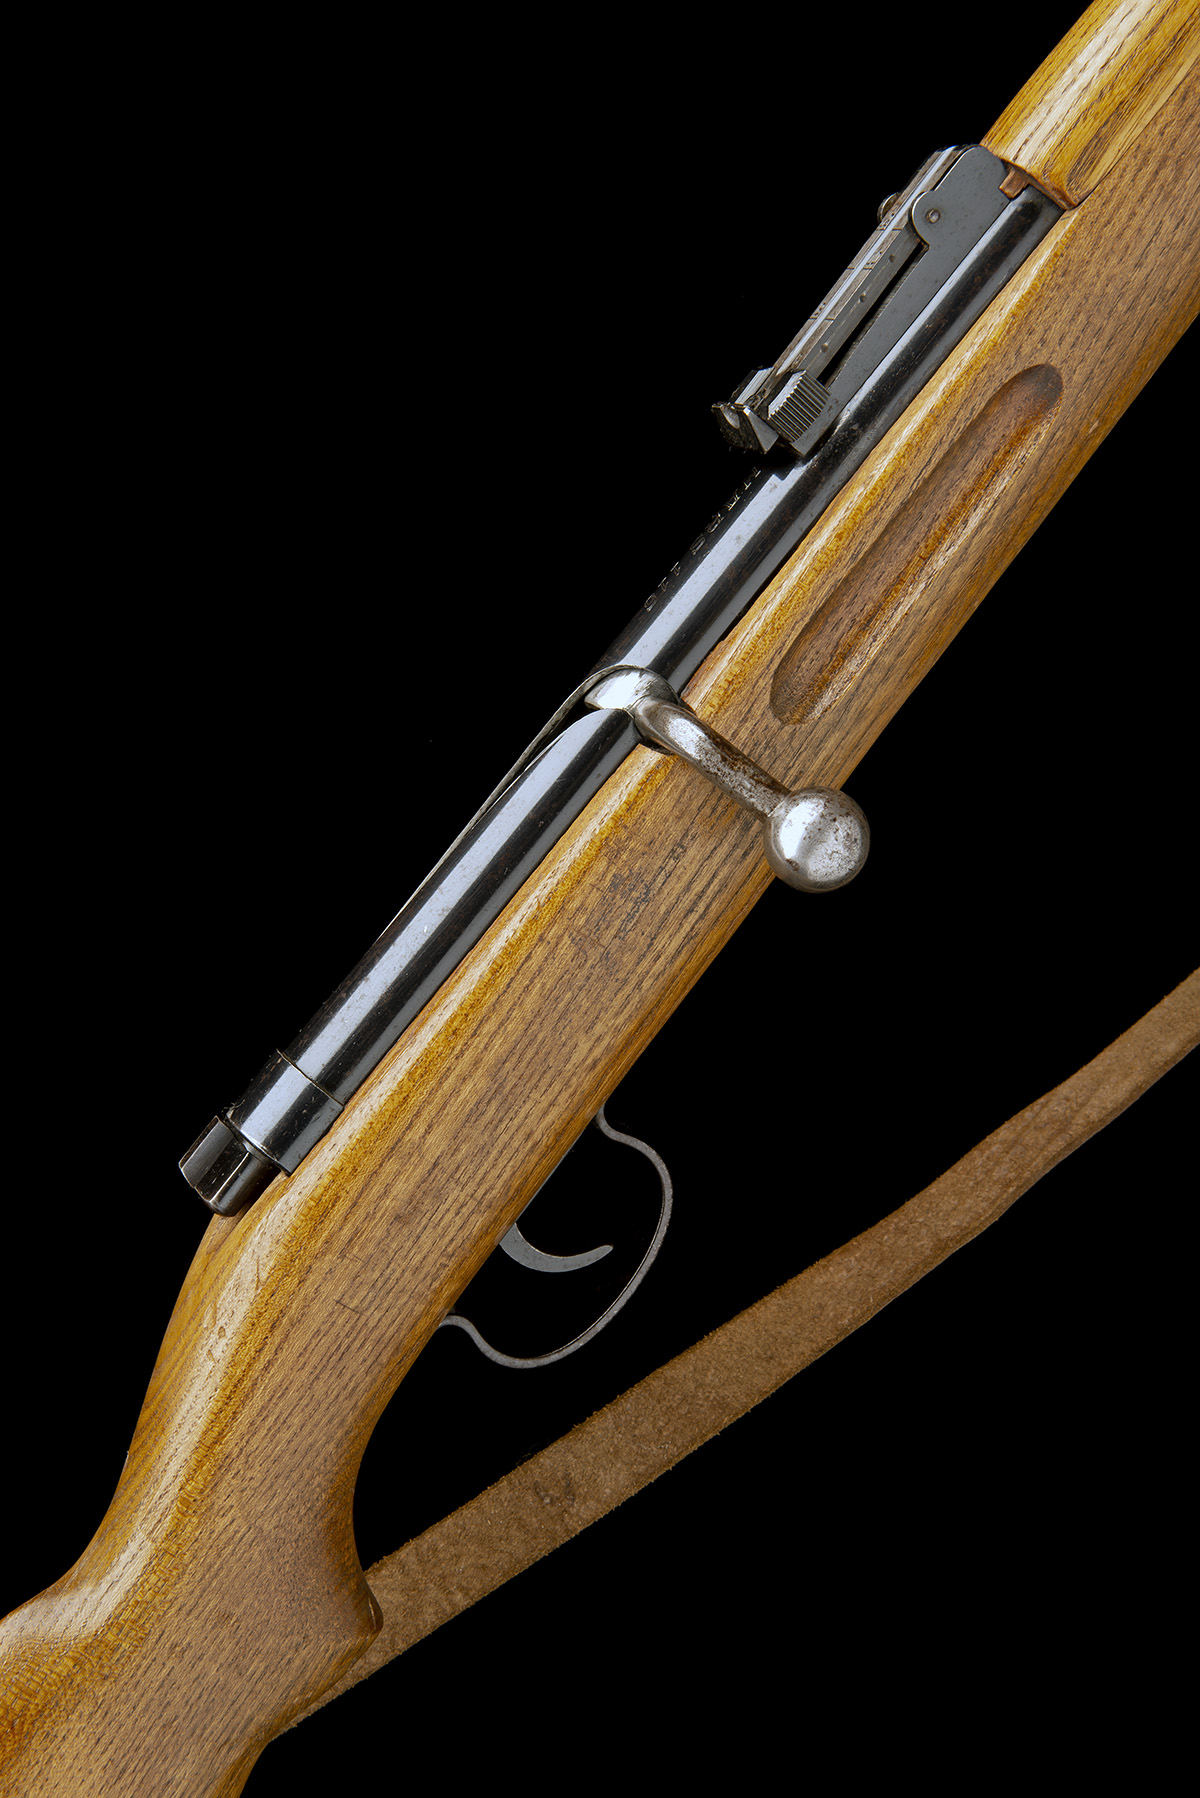 A 4.4mm (BB) REPEATING AIR-RIFLE SIGNED MARS, MODEL '115 MILITARY TRAINER', serial no. 841155, circa